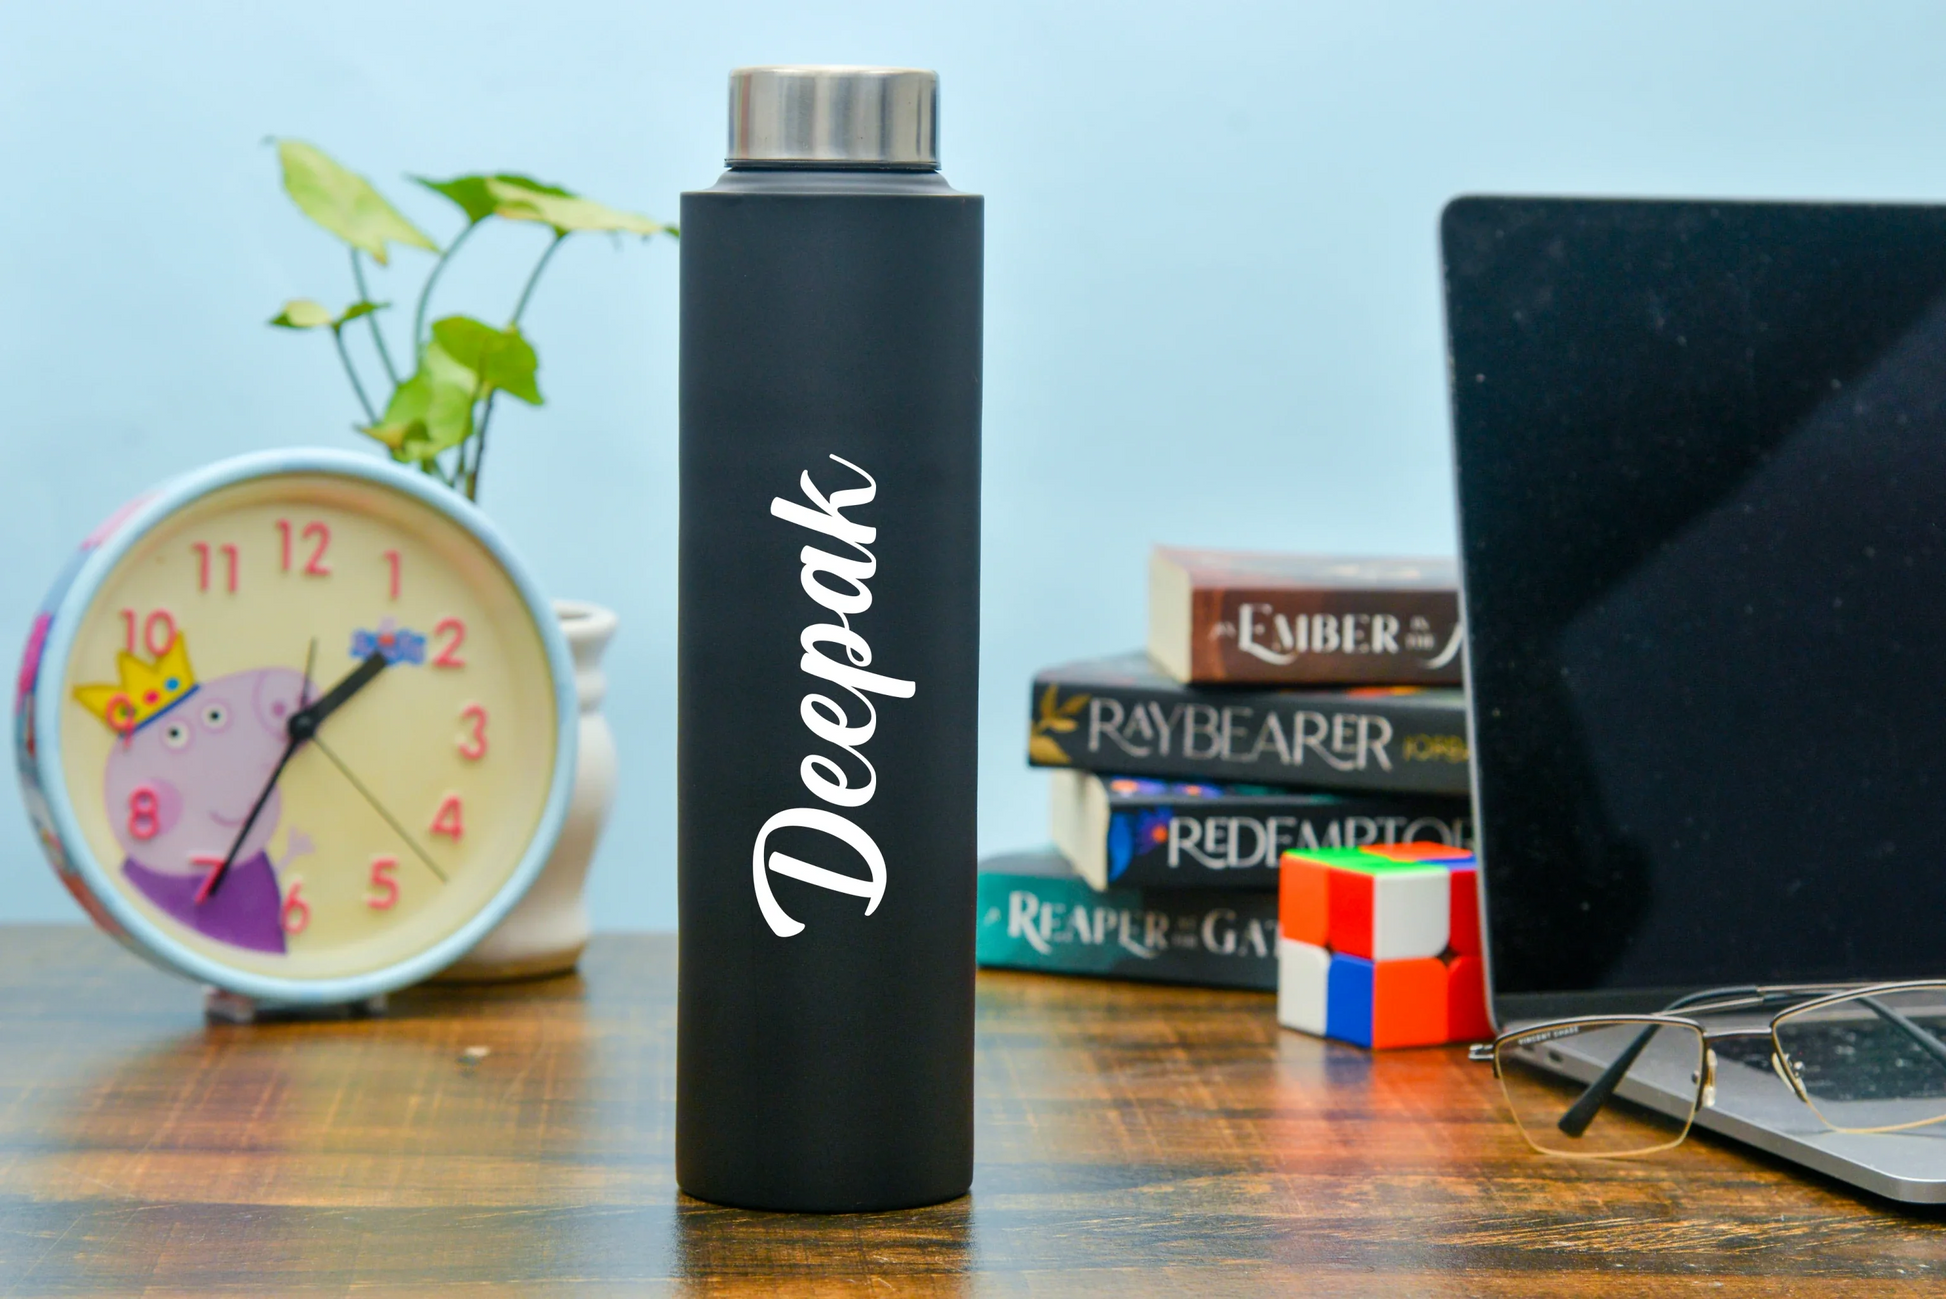 Stay hydrated in style with our high-quality stainless steel bottle. It's the perfect companion for all your adventures.